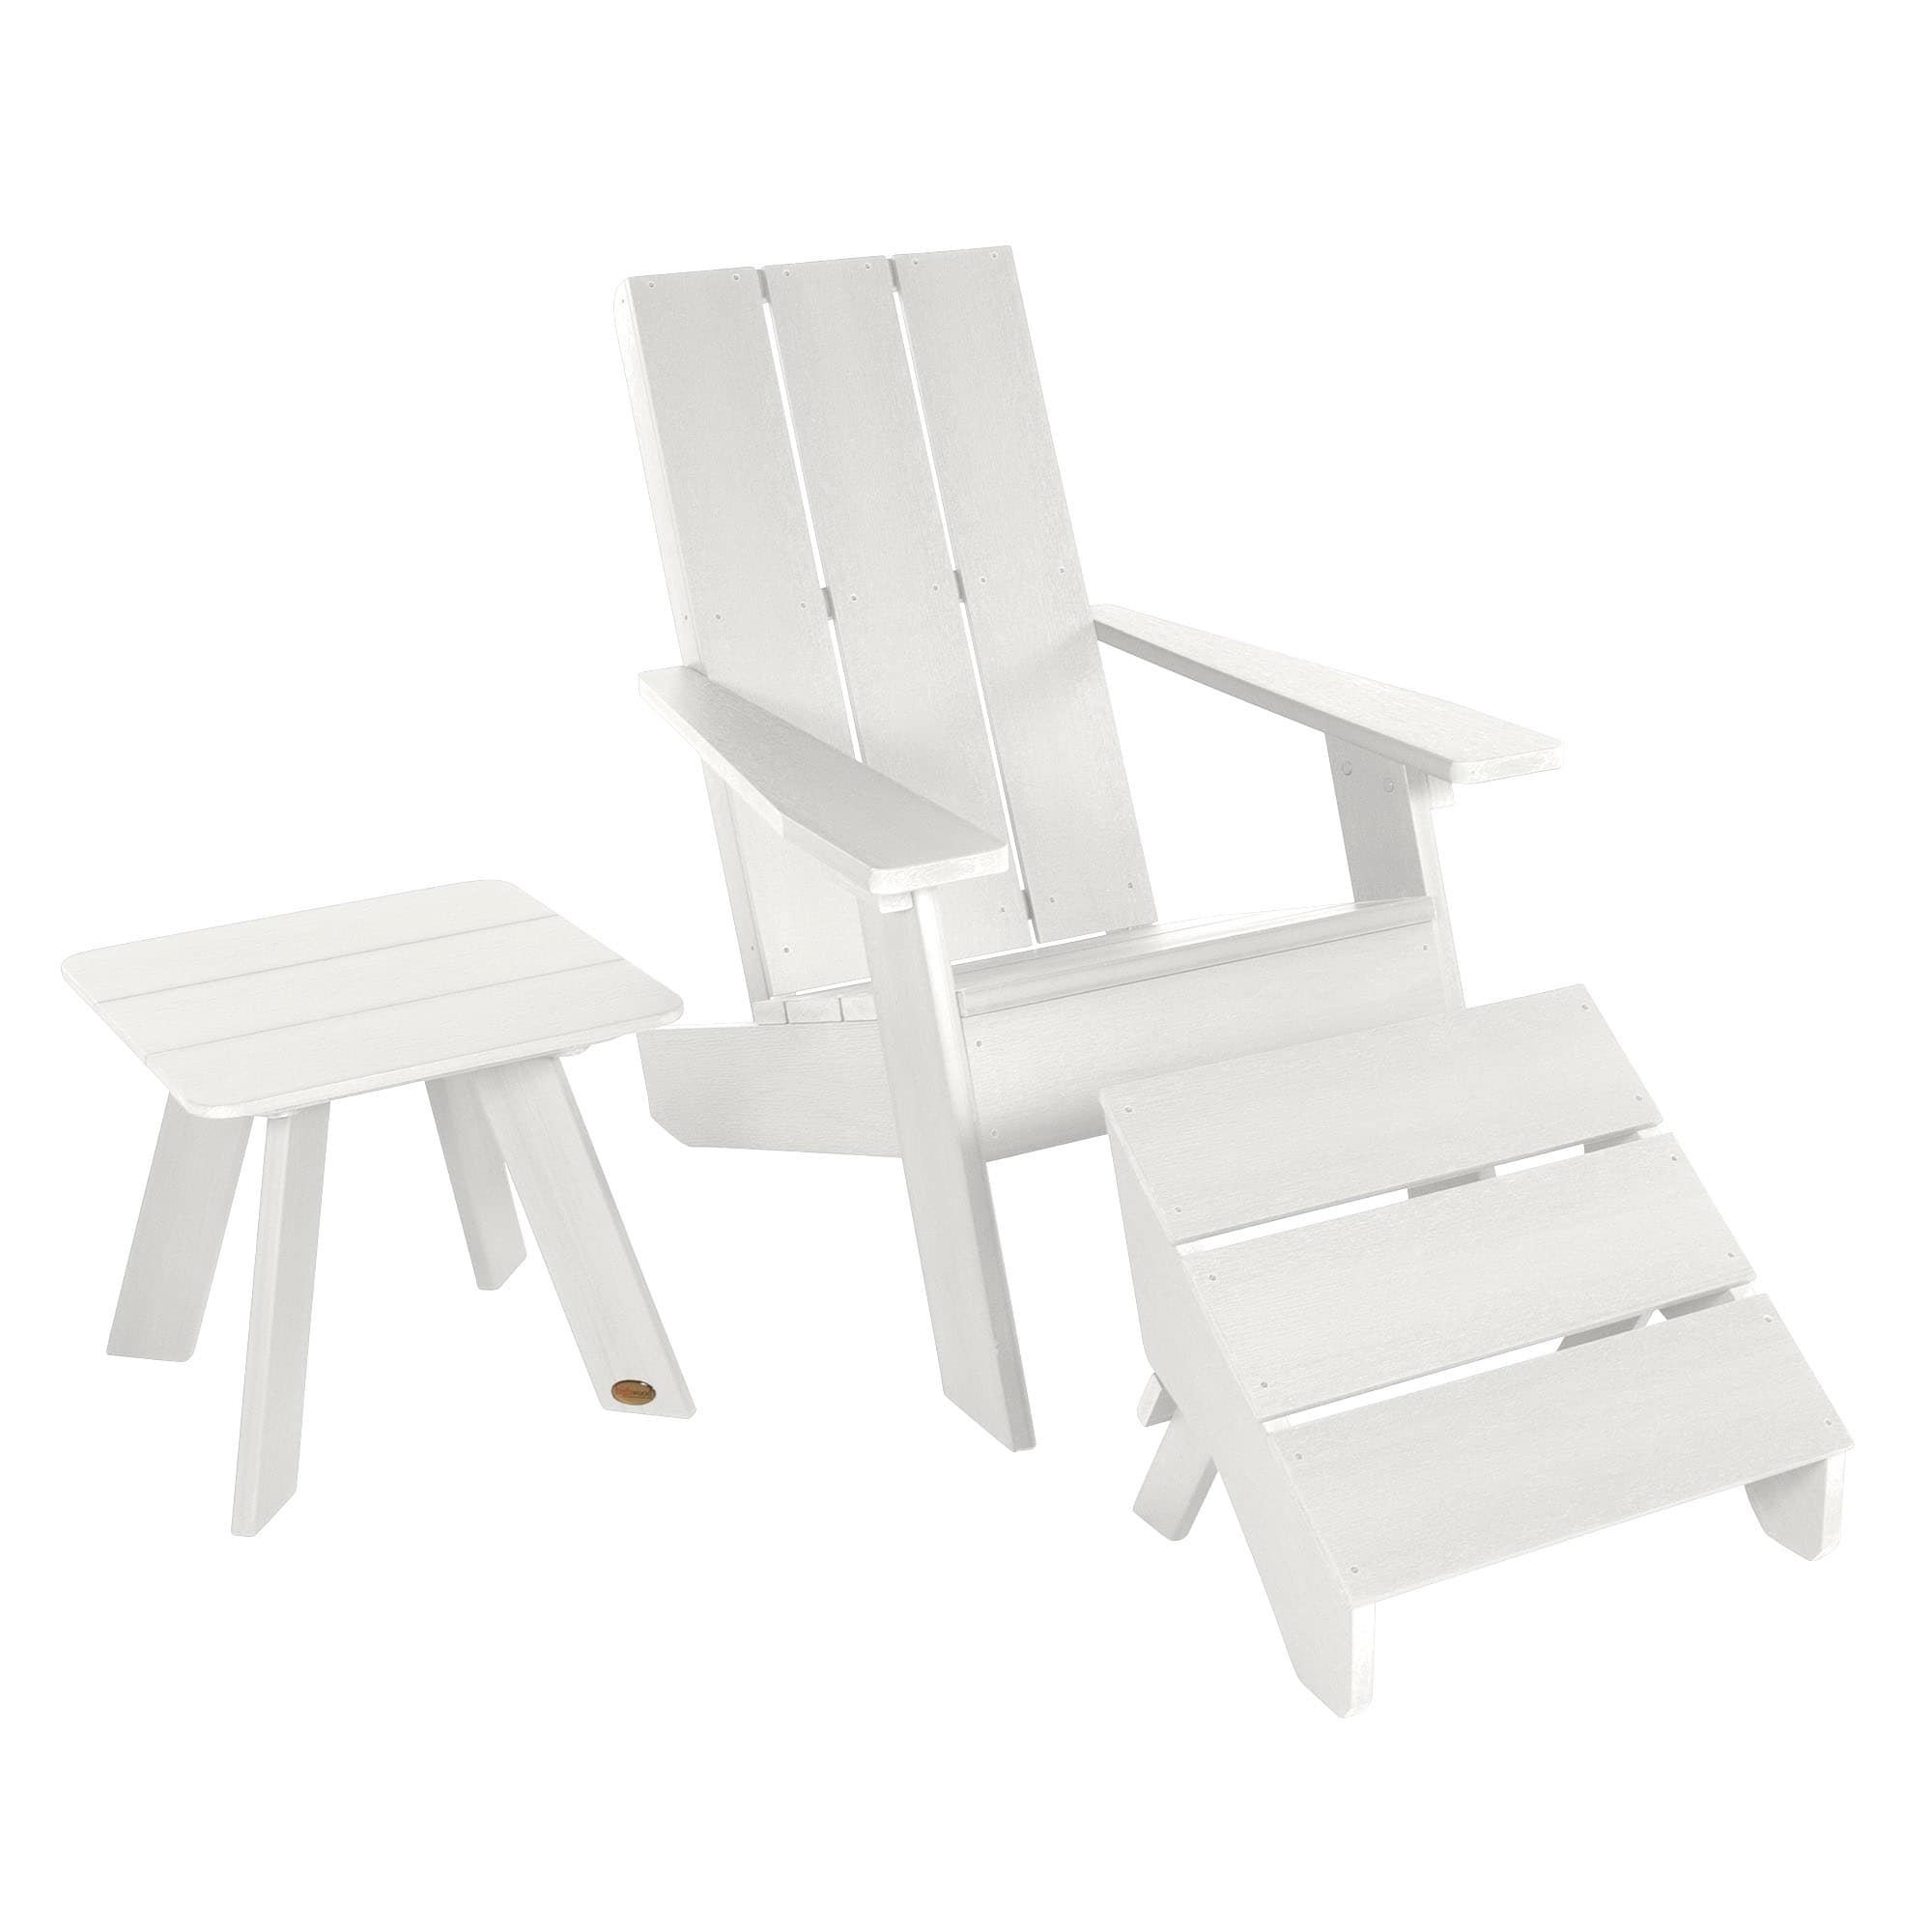 Highwood Italica Modern Adirondack Chair With Side Table And Folding Ottoman